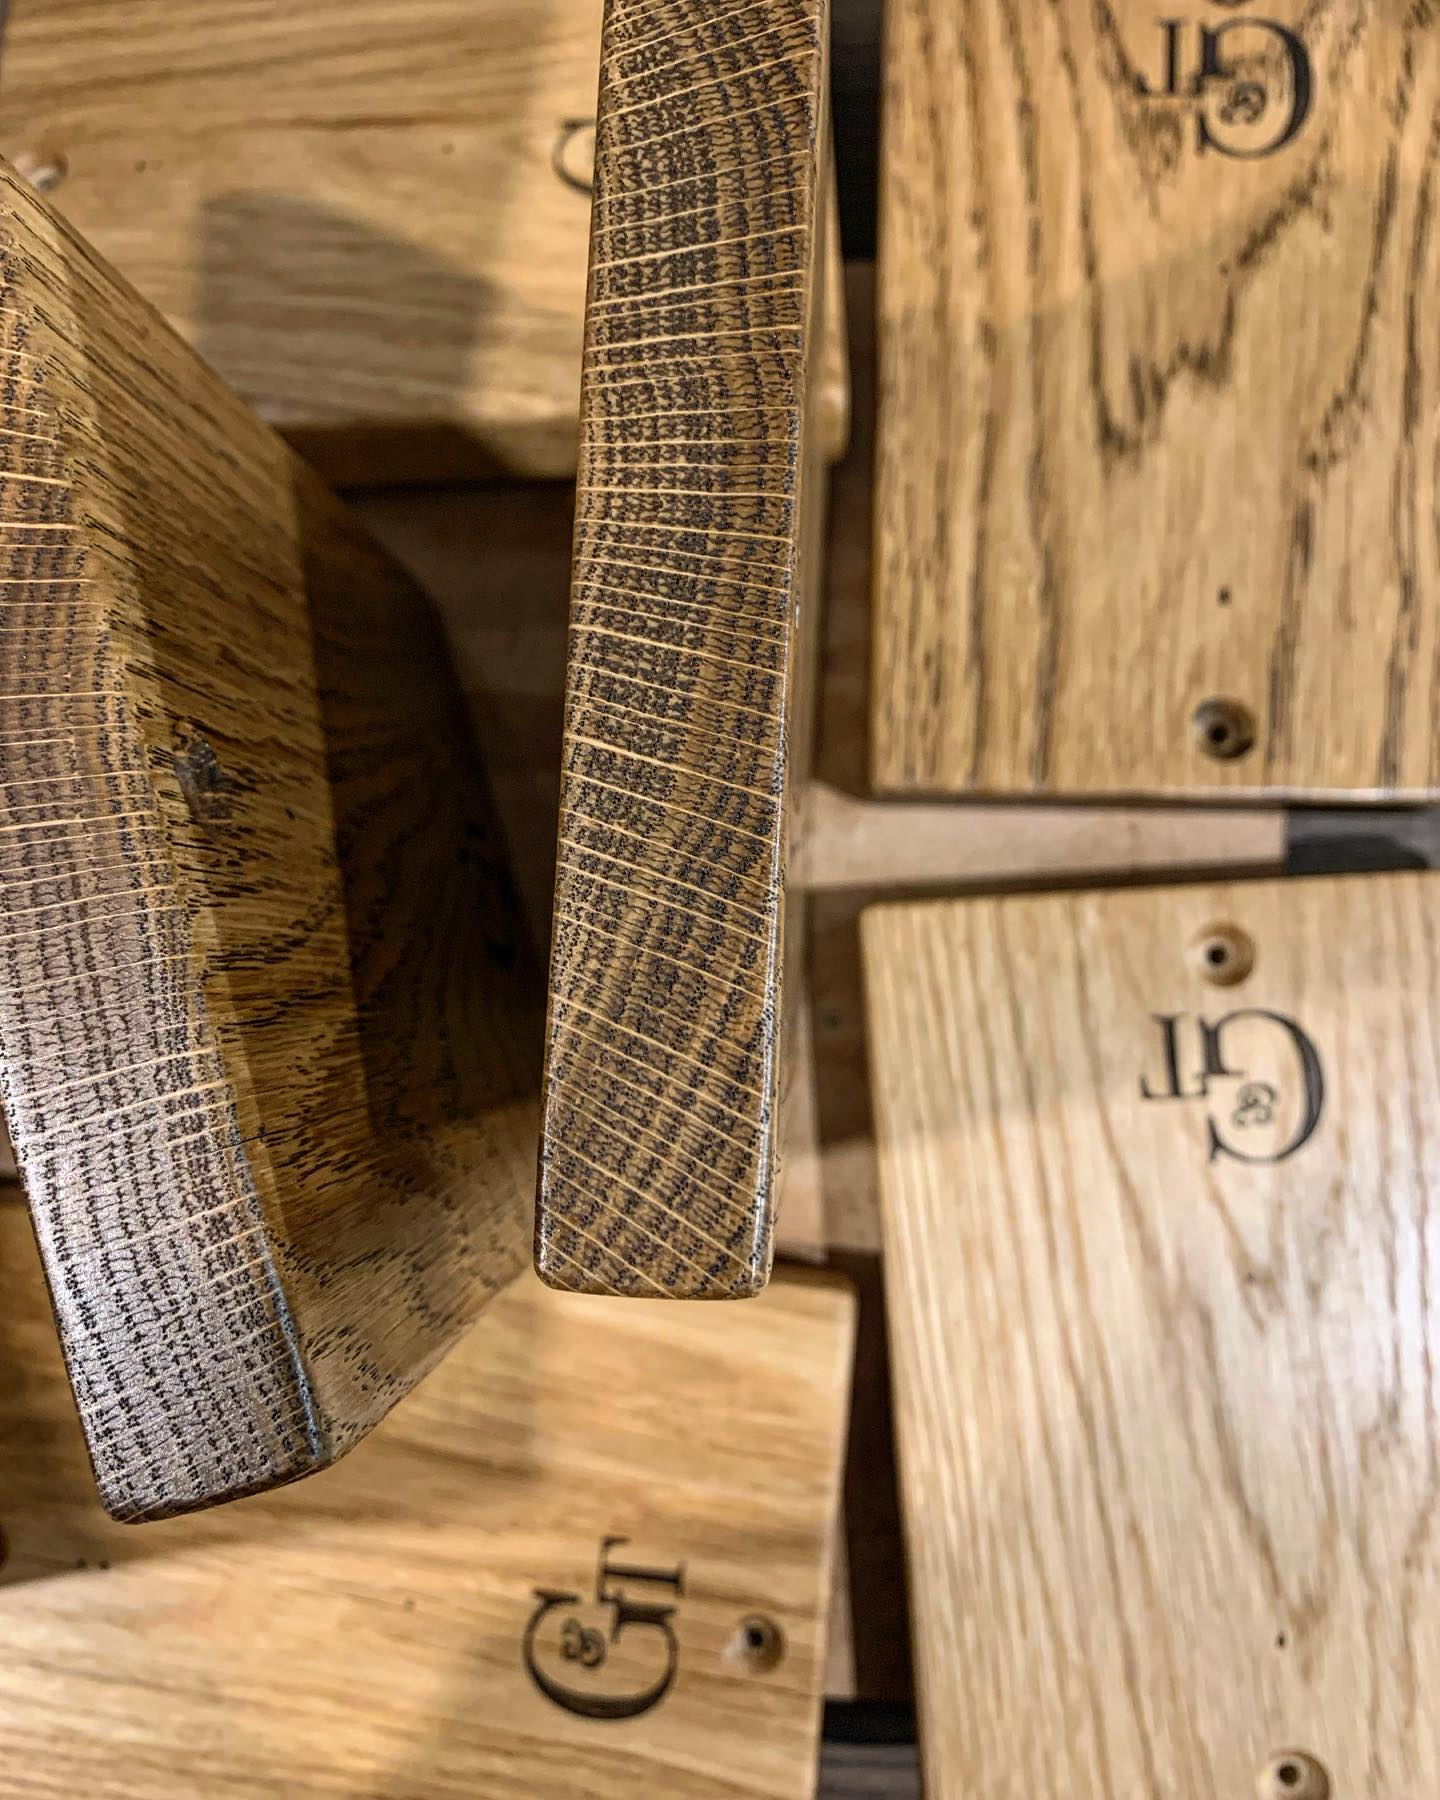 Stocking up on our Oak Wall Mount Bottle Openers today  loving the grain on these beauties!